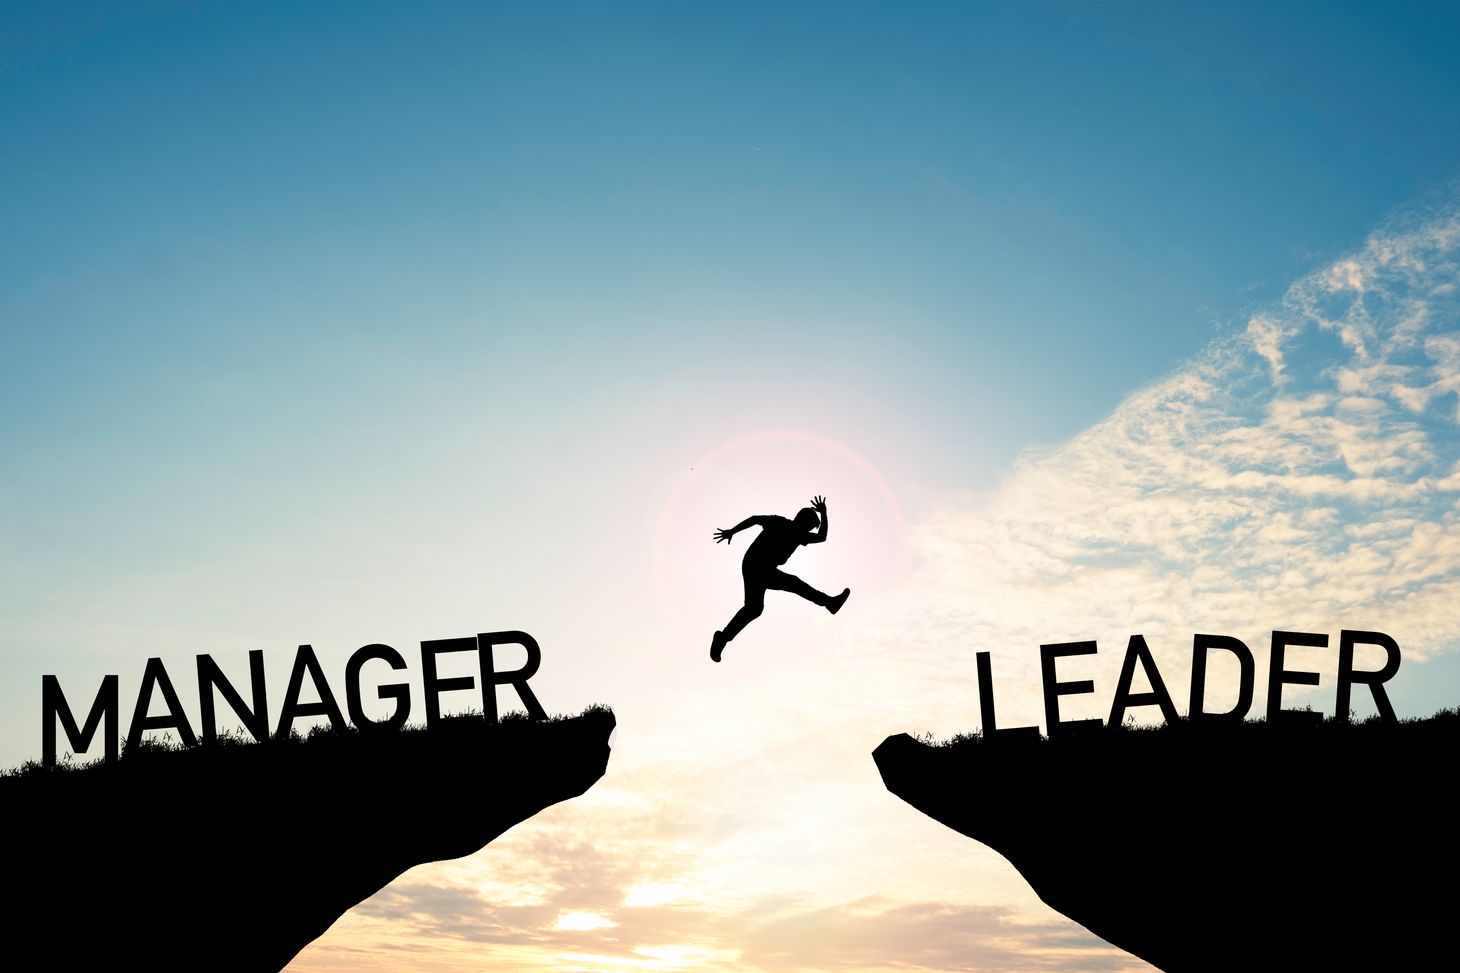 Image of a person jumping from being a manager to becoming a leader. 